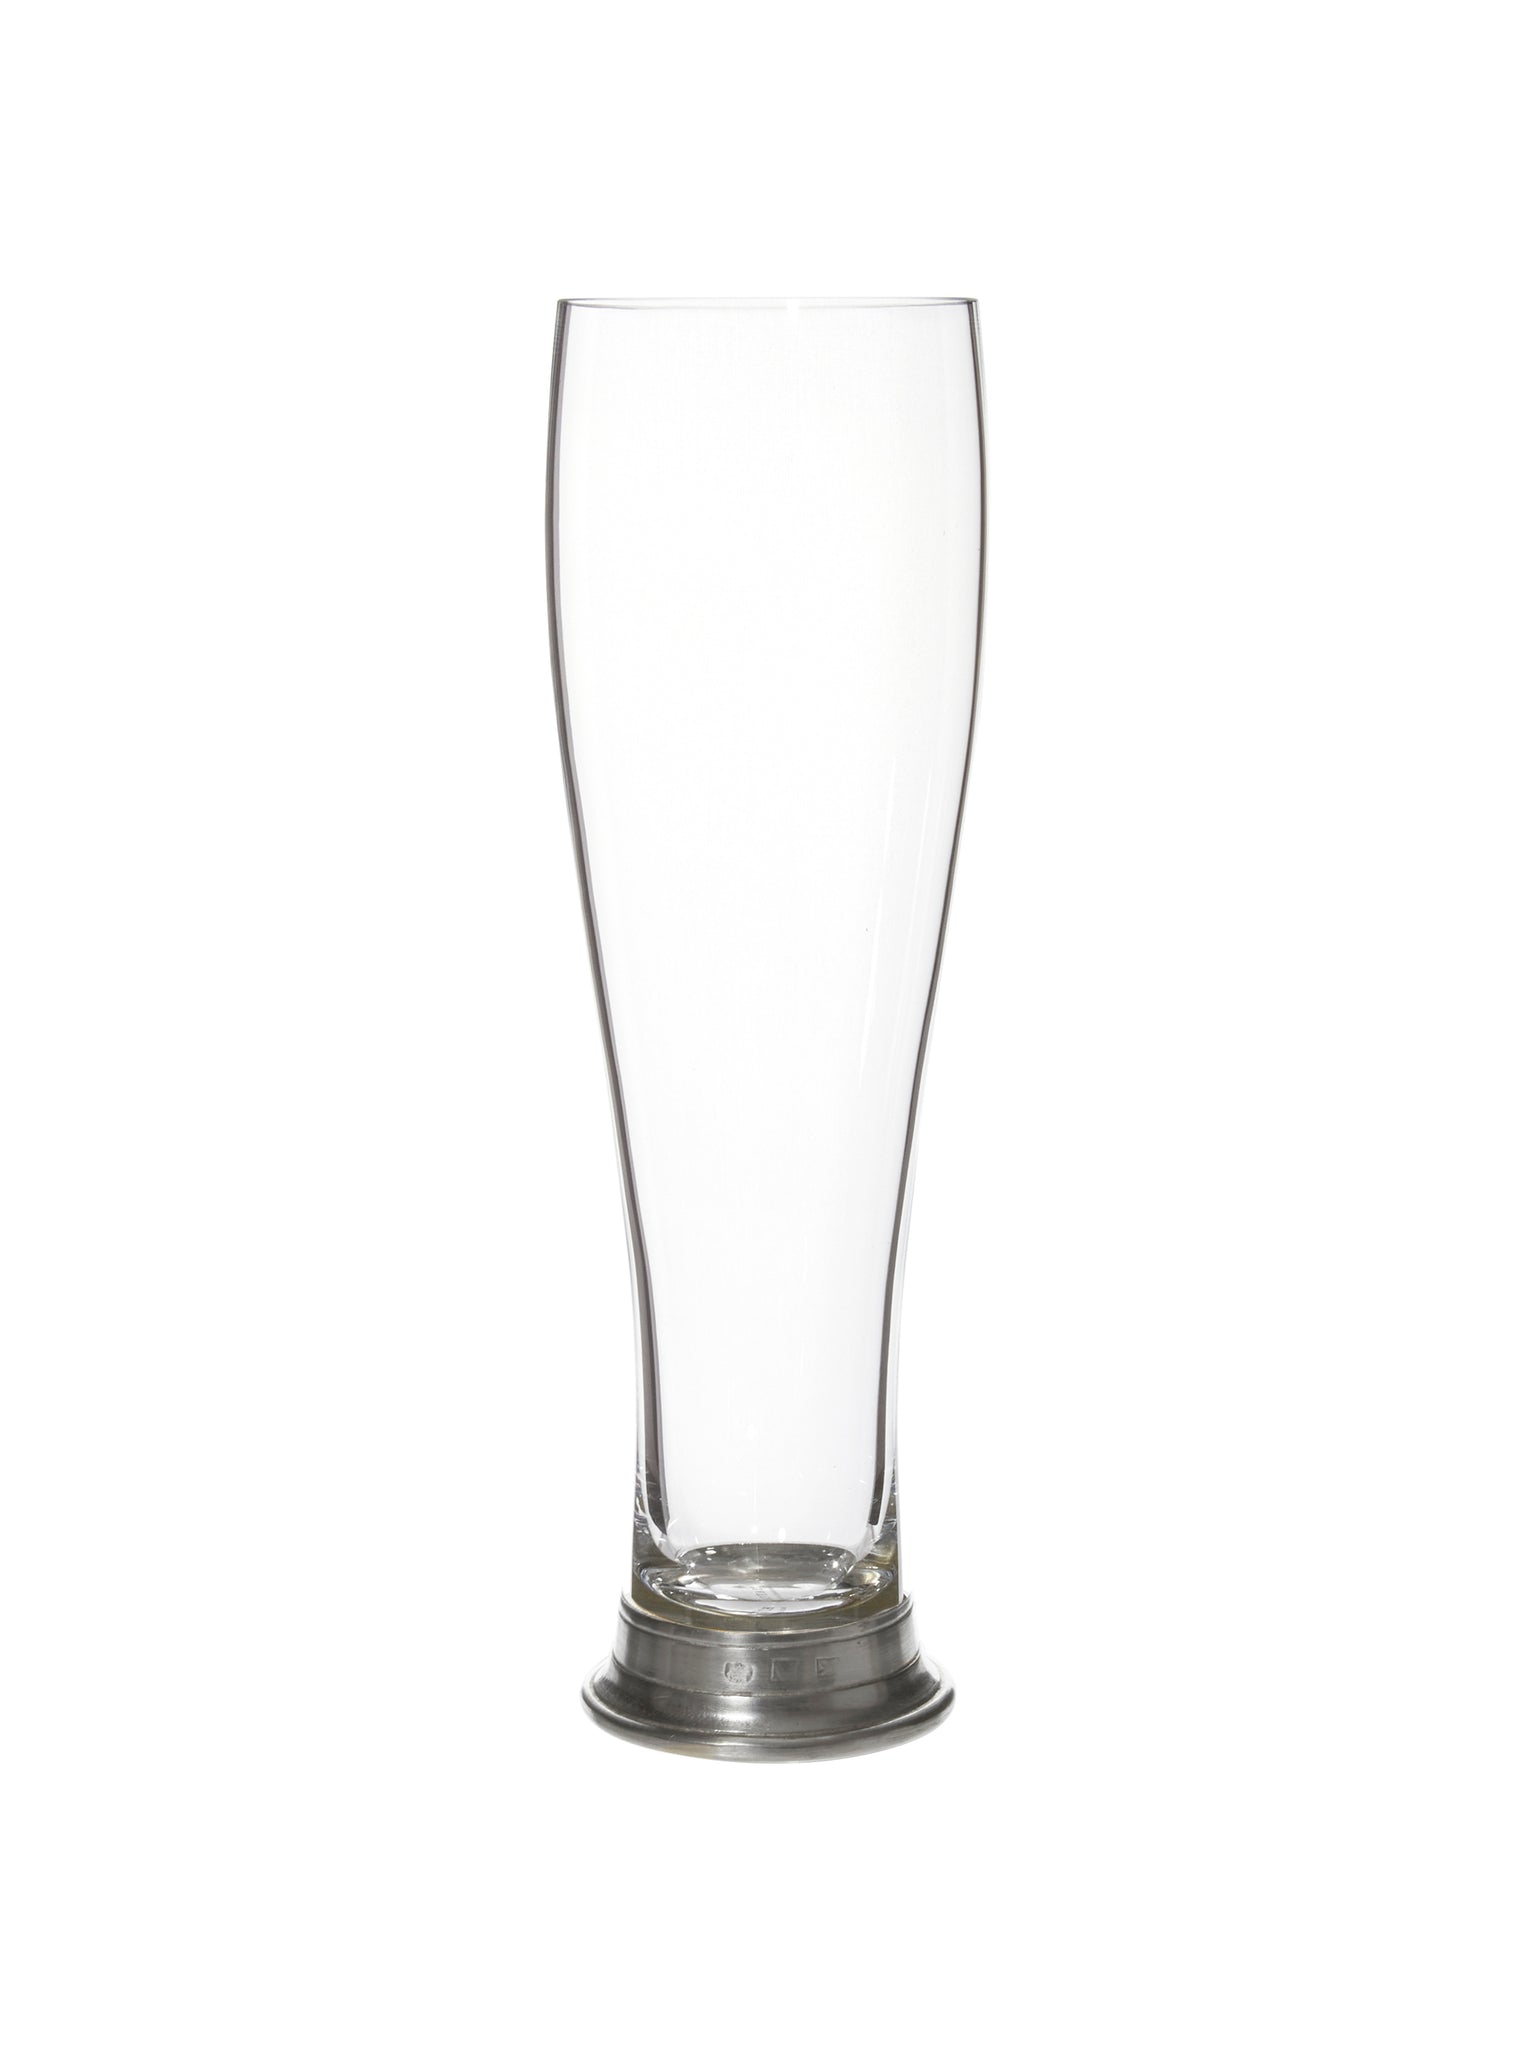 MATCH Pewter Pilsner Beer Glass Weston Table